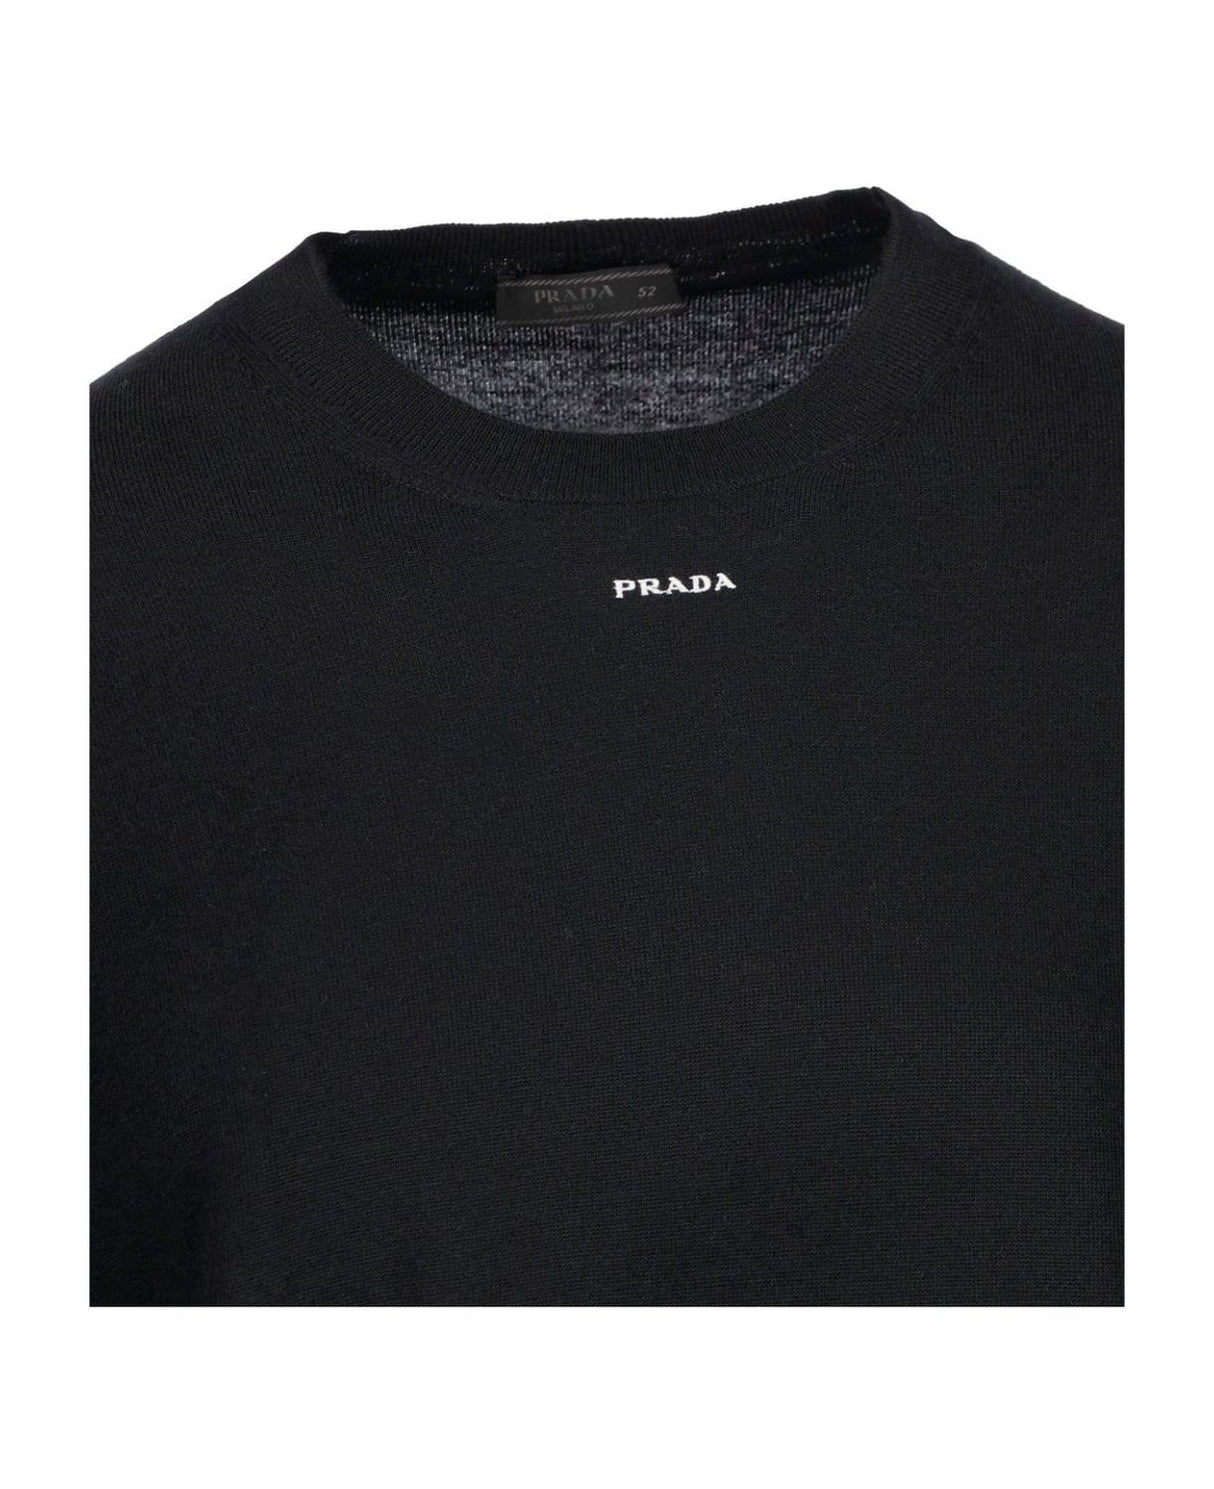 PRADA Luxurious Black Knitwear for Men from Italian Designer - SS24 Collection